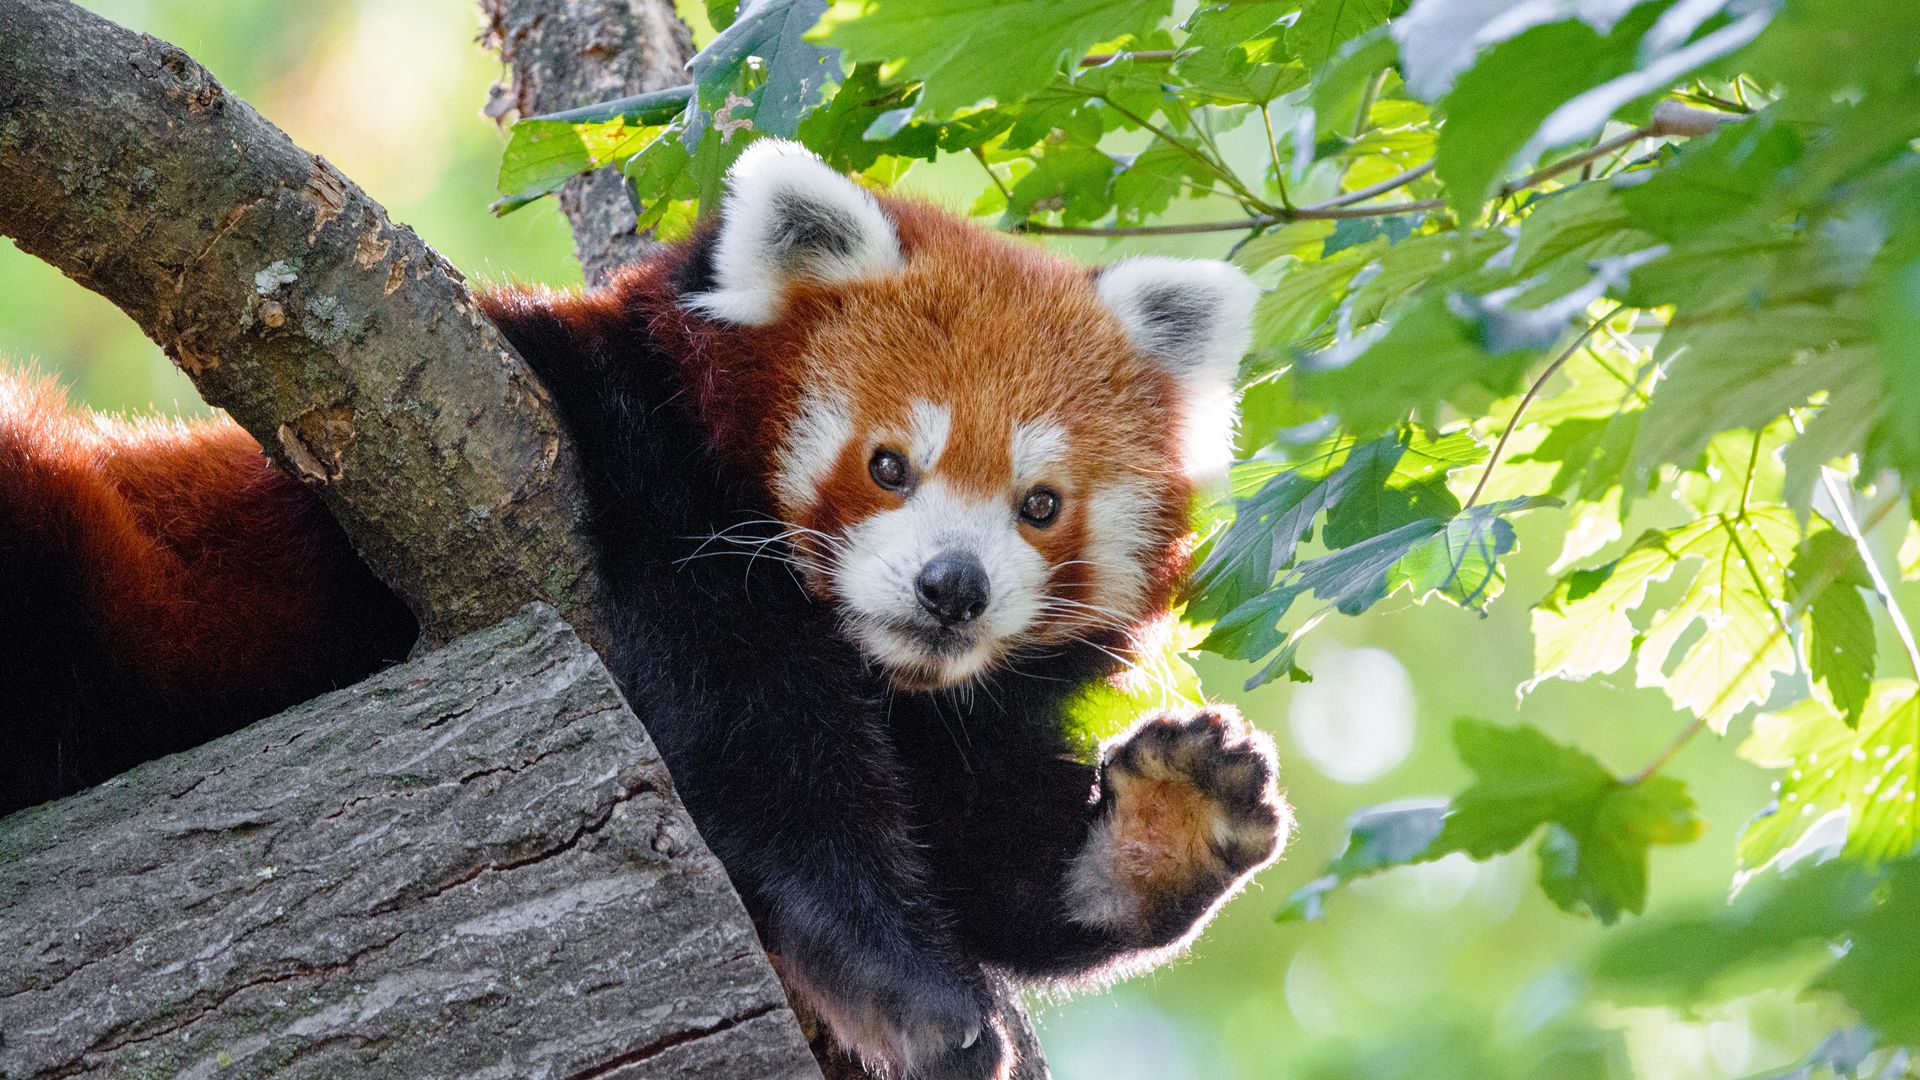 Download wallpaper 1920x1080 red panda, funny, animal, paw full hd, hdtv,  fhd, 1080p hd background